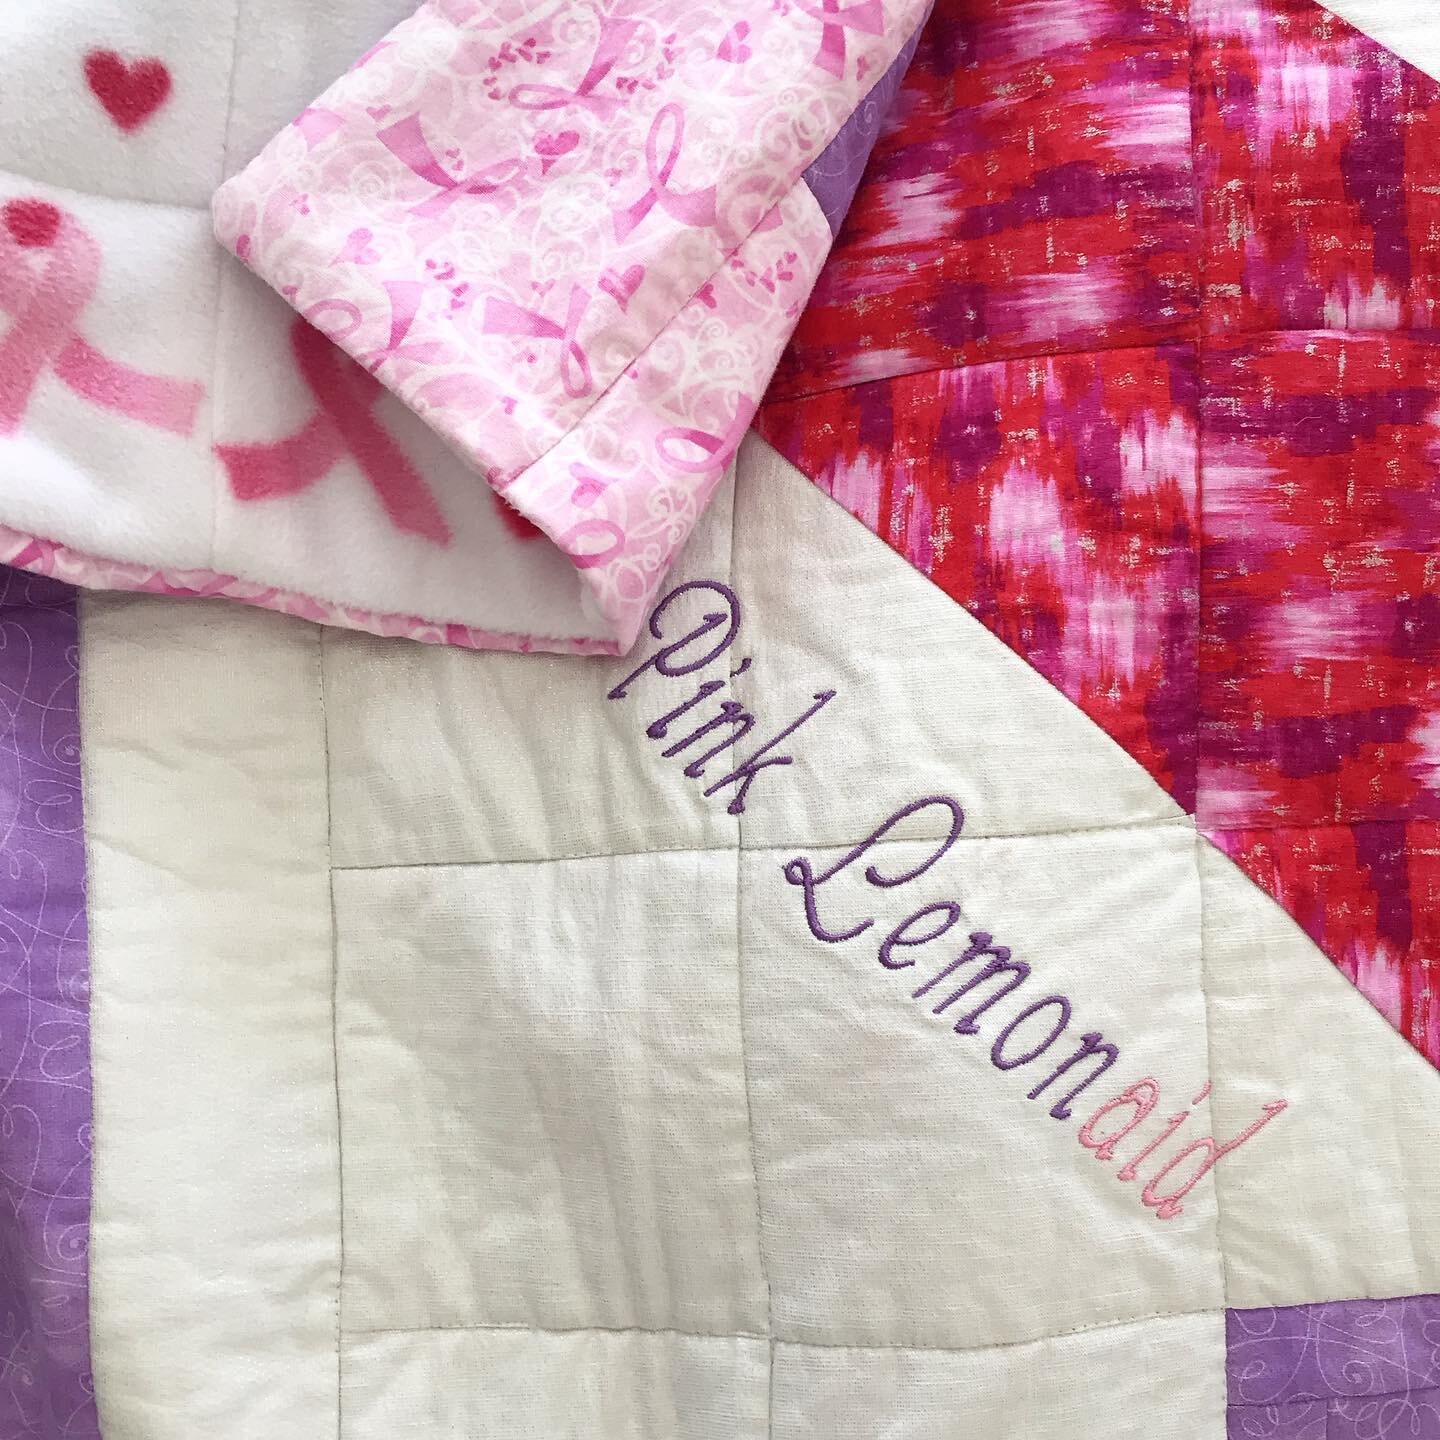 Cozying up with this incredible #breastcancerawareness quilt by my friend Donna @fallenbluequilts_ 
So honored to have this piece of art and reminder of how blessed I am to be alive and tell my story. Love you Donna! ❤️